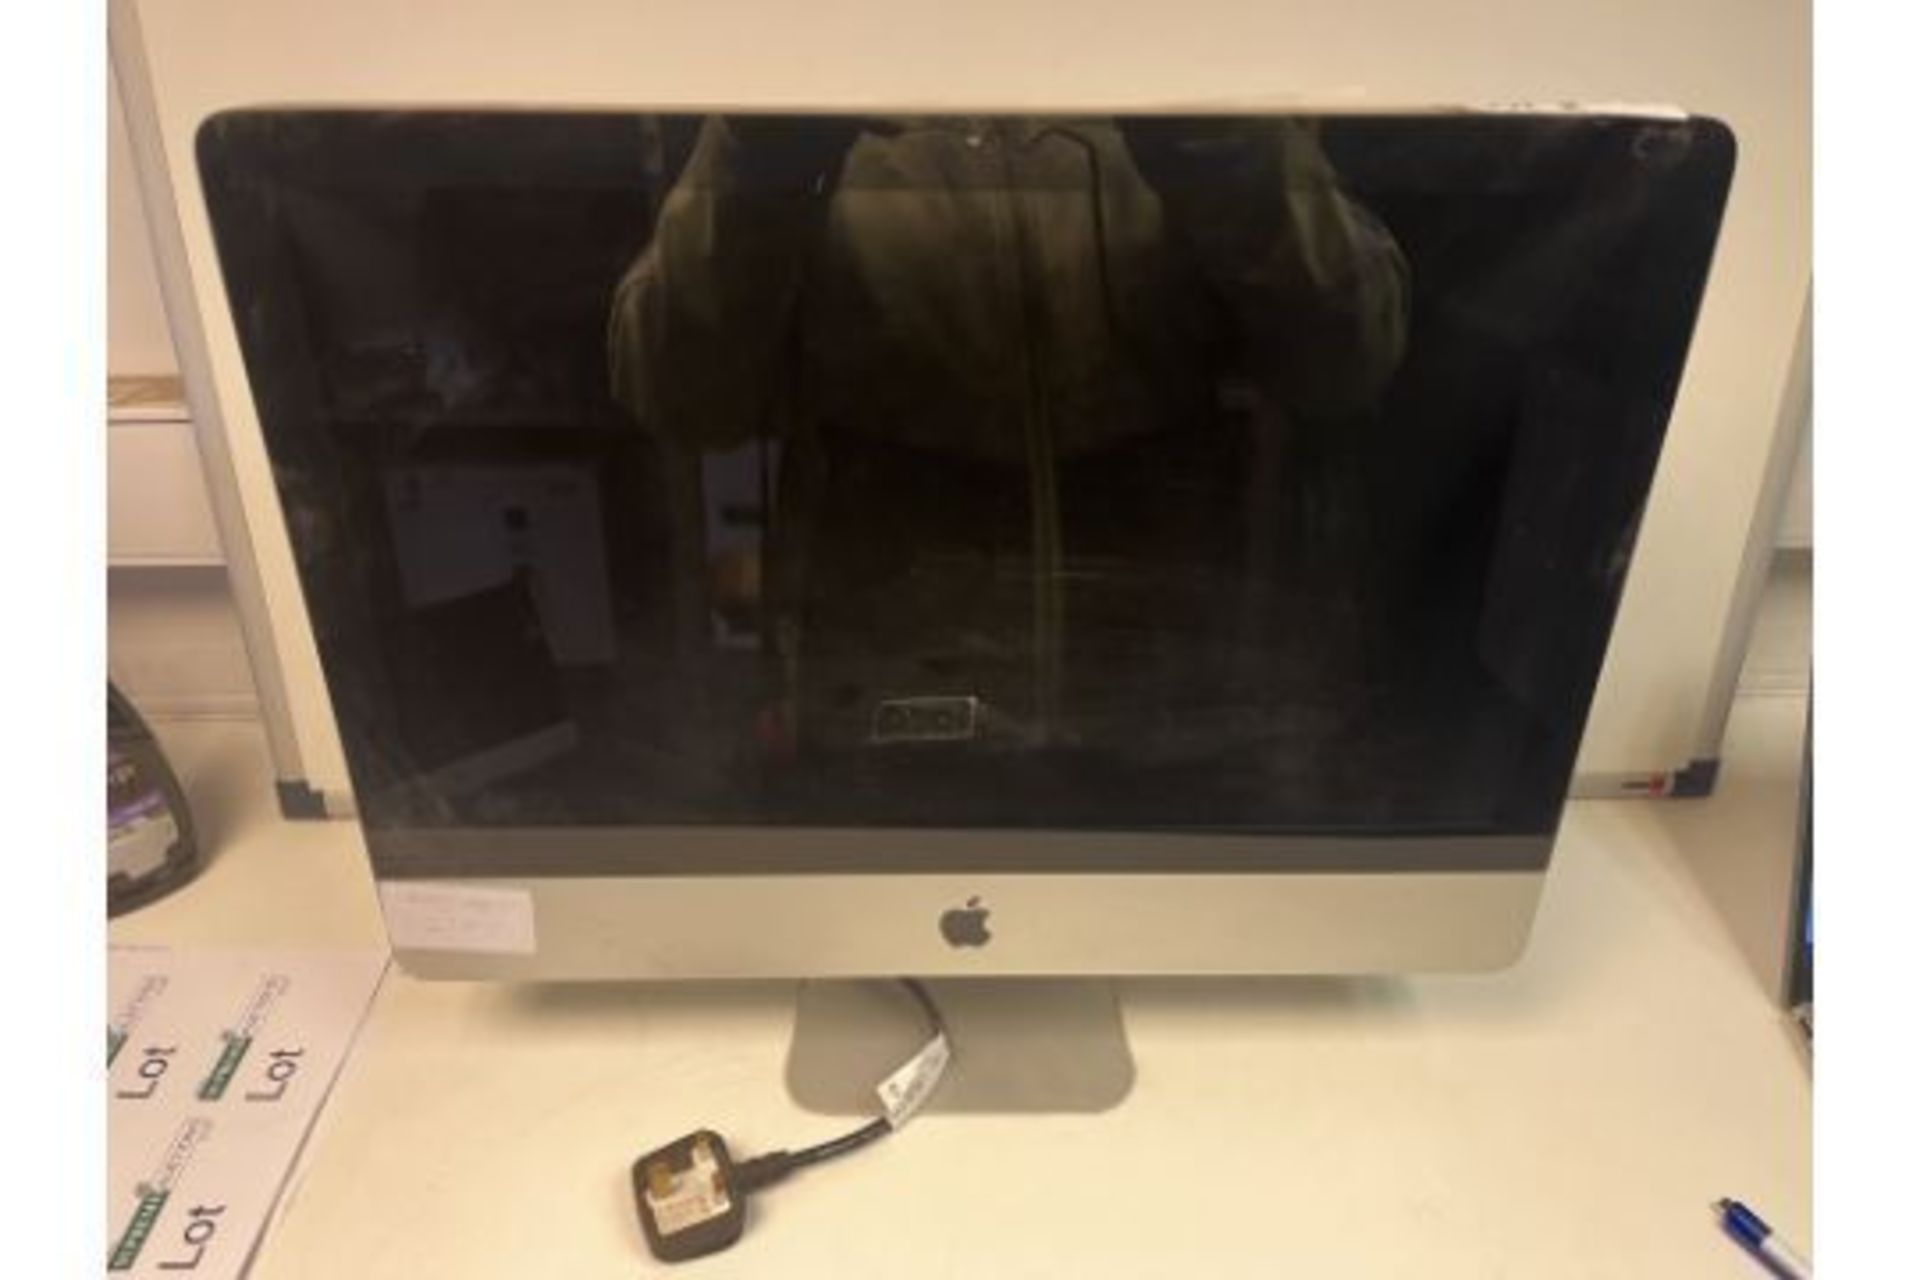 APPLE IMAC ALL IN ONE PC, INTEL CORE i5, 2.5GHZ, HIGH SIERRA OPERATING SYSTEM, 500GB HARD DRIVE WITH